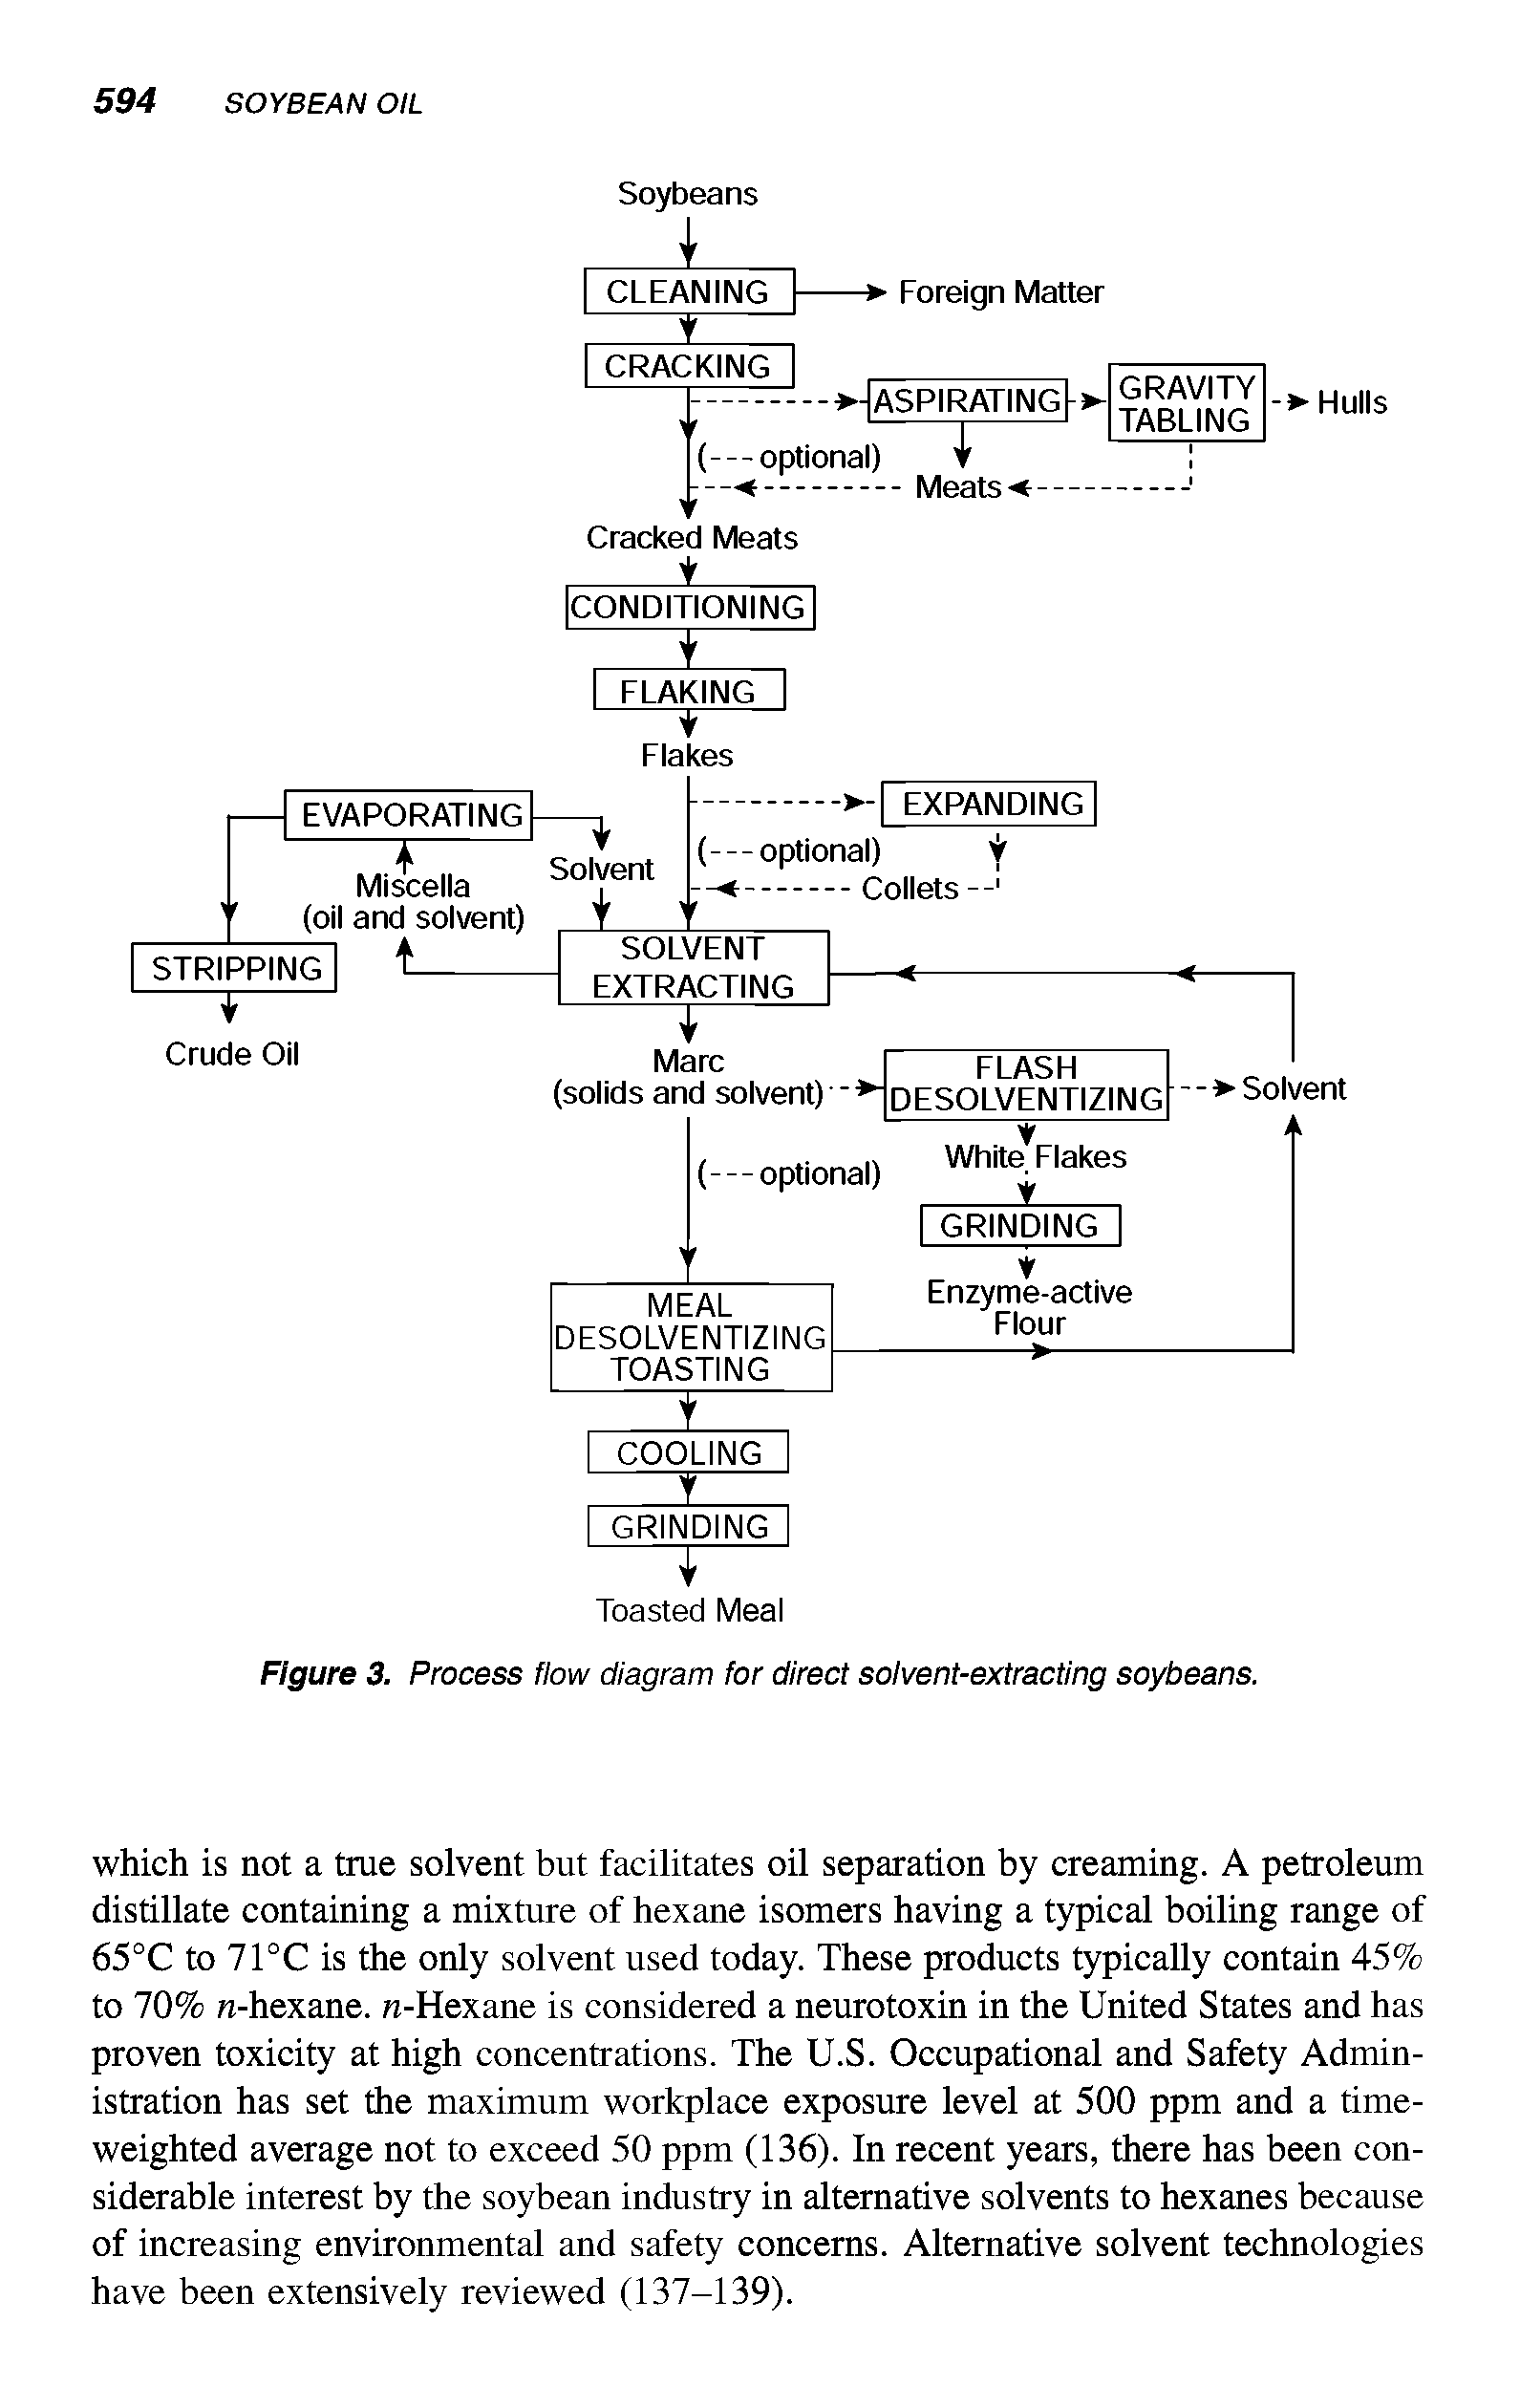 Figure 3. Process flow diagram for direct solvent-extracting soybeans.